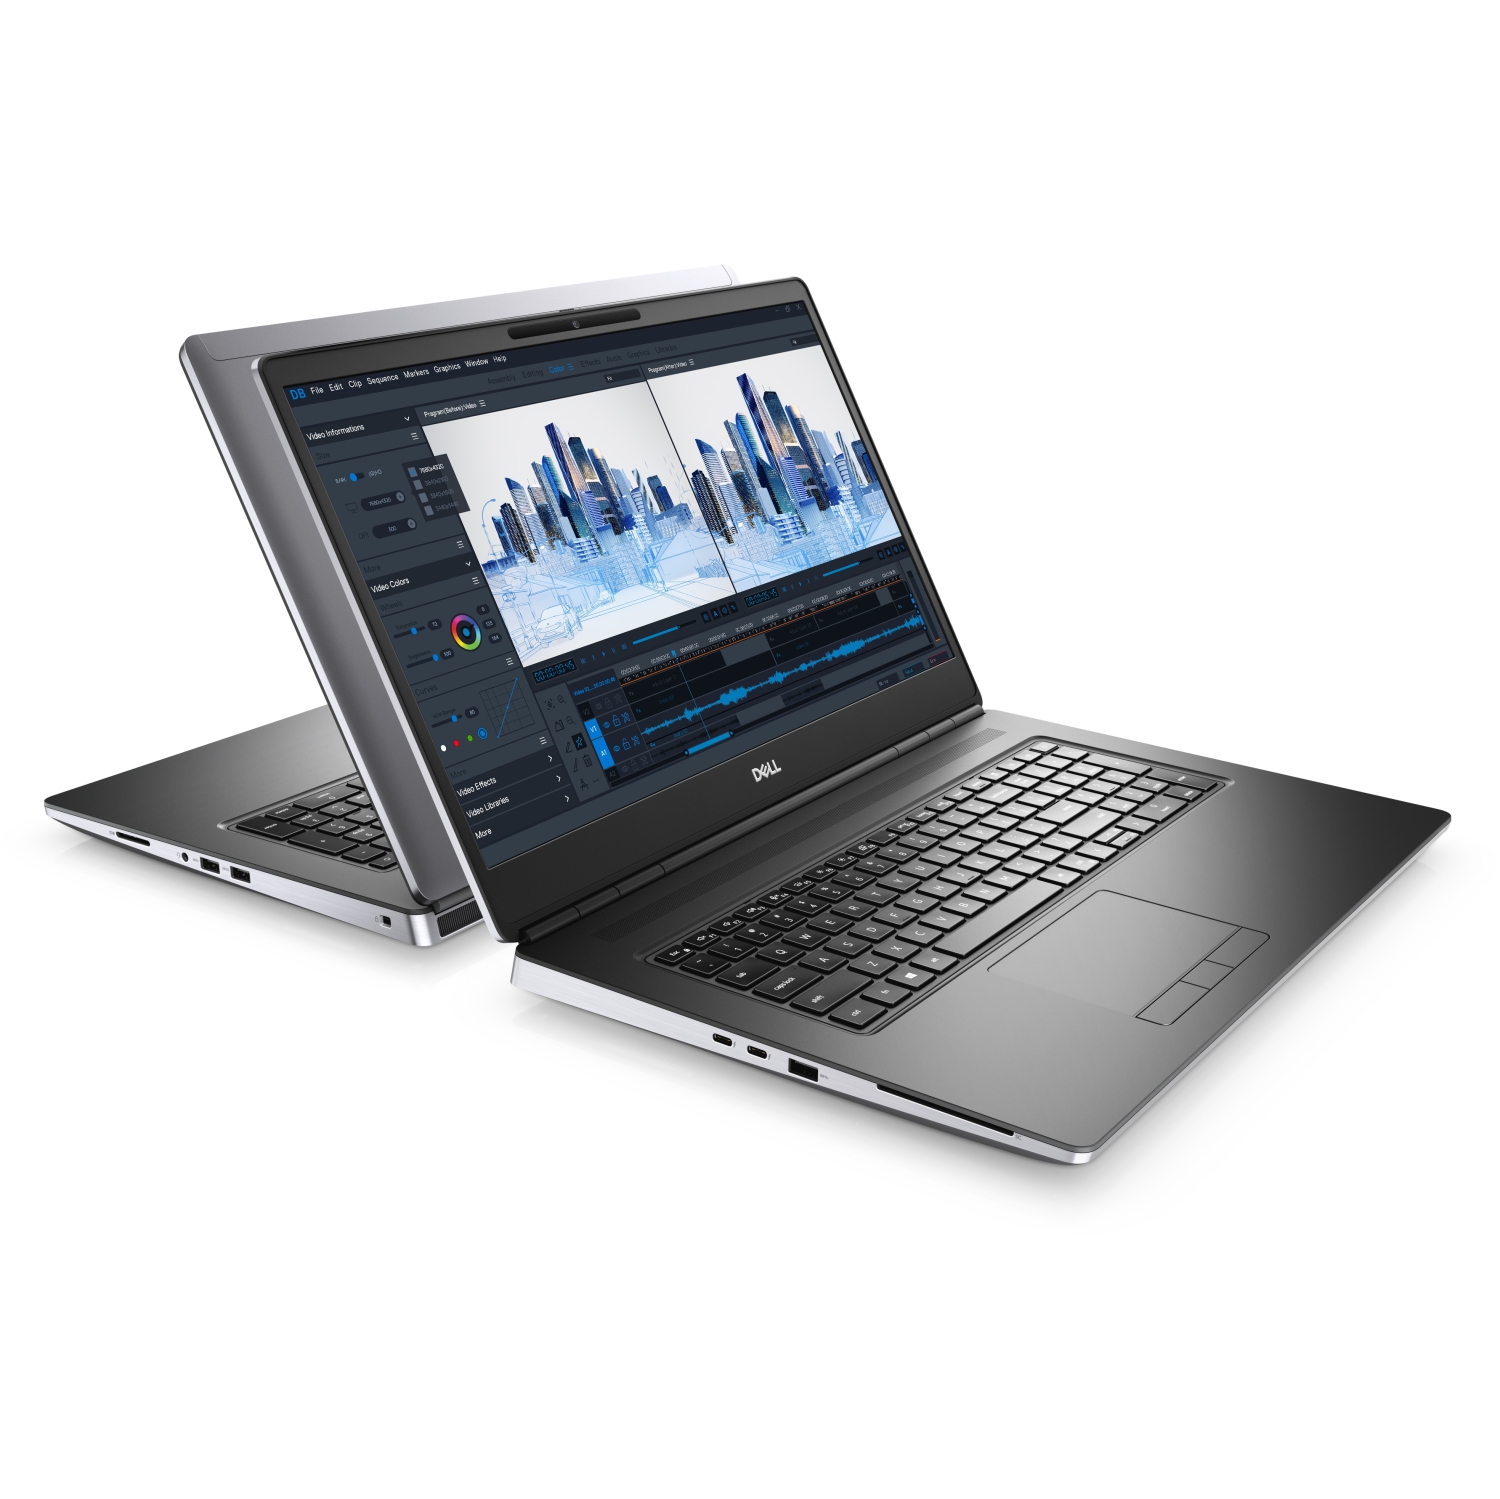 Refurbished (Excellent) - Dell Precision 7000 7760 Workstation Laptop (2021), 17.3" FHD, Core i7, 1TB SSD, 32GB RAM, RTX A4000, 4.8 GHz, 11th Gen CPU Certified